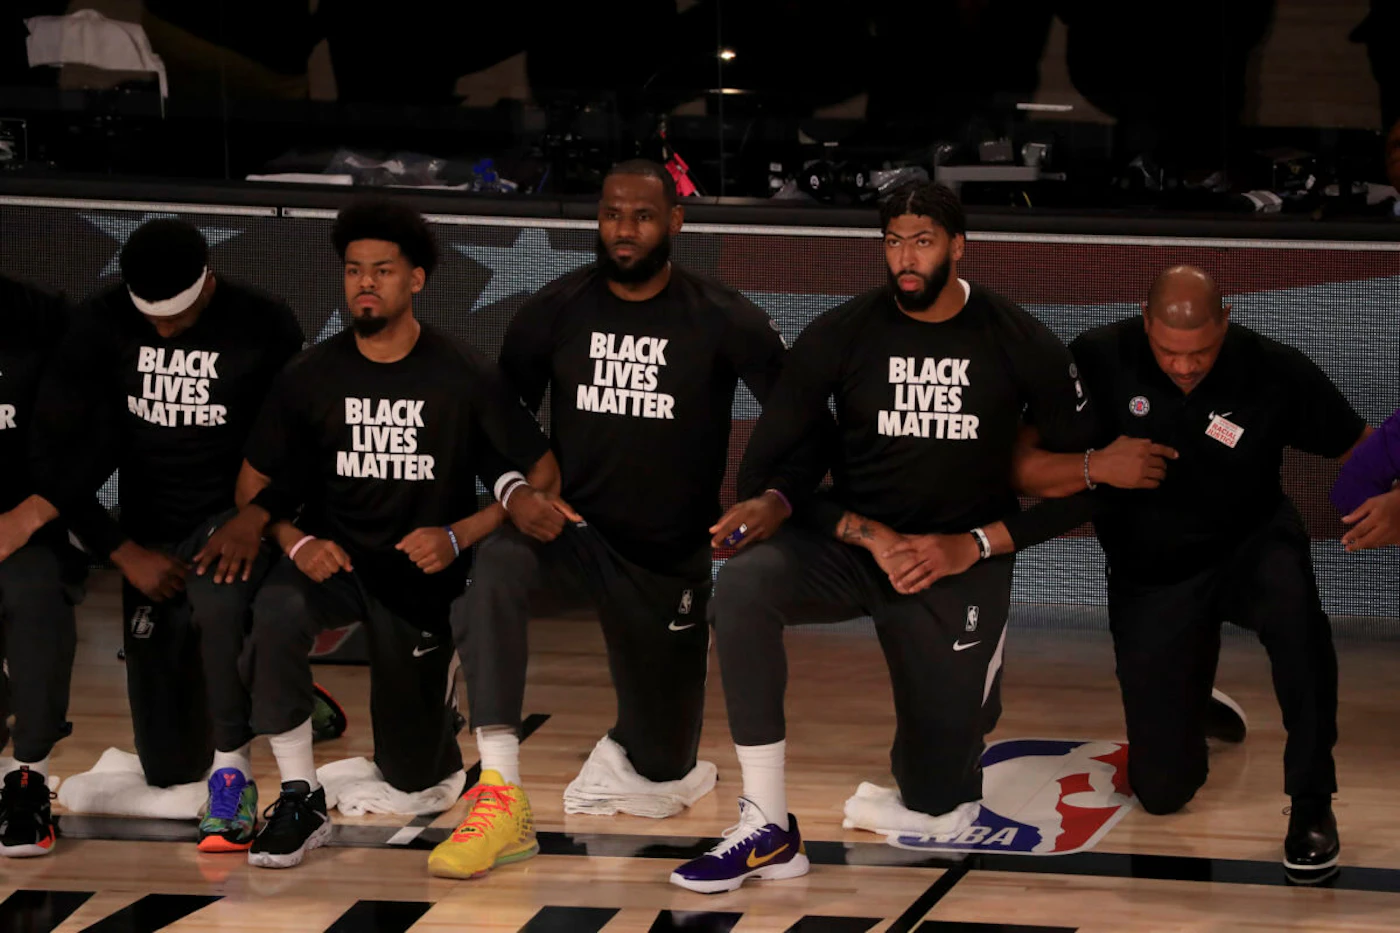 Lebron James is just one of the many athletes who have stood up to support Black Lives Matter since George Floyd's killing by police in May.